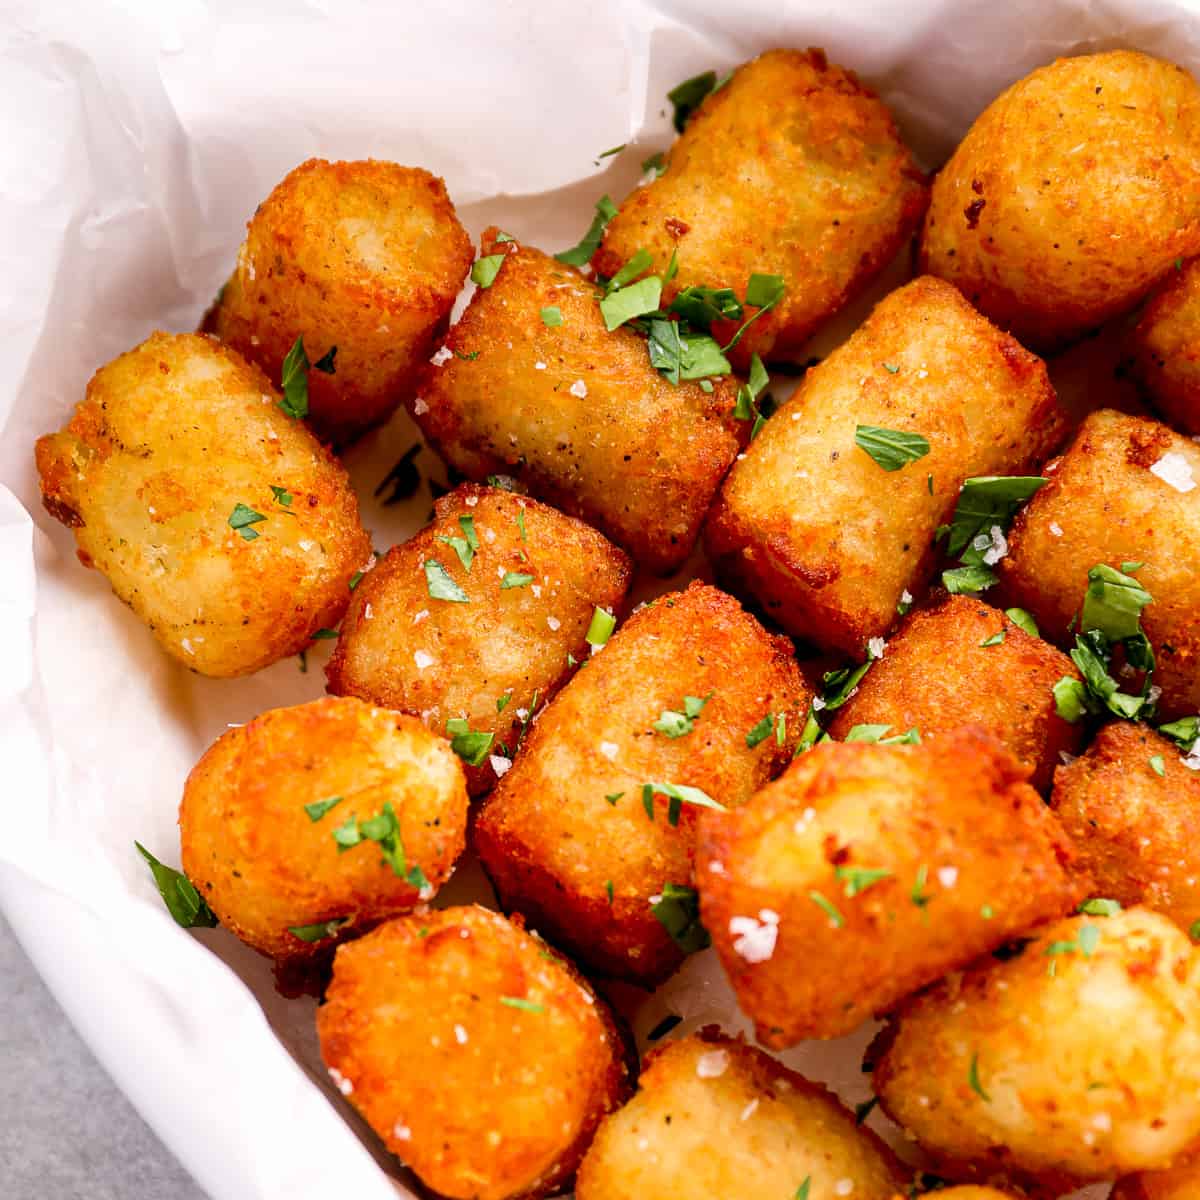 https://www.thecookierookie.com/wp-content/uploads/2023/03/featured-homemade-tater-tots-recipe.jpg